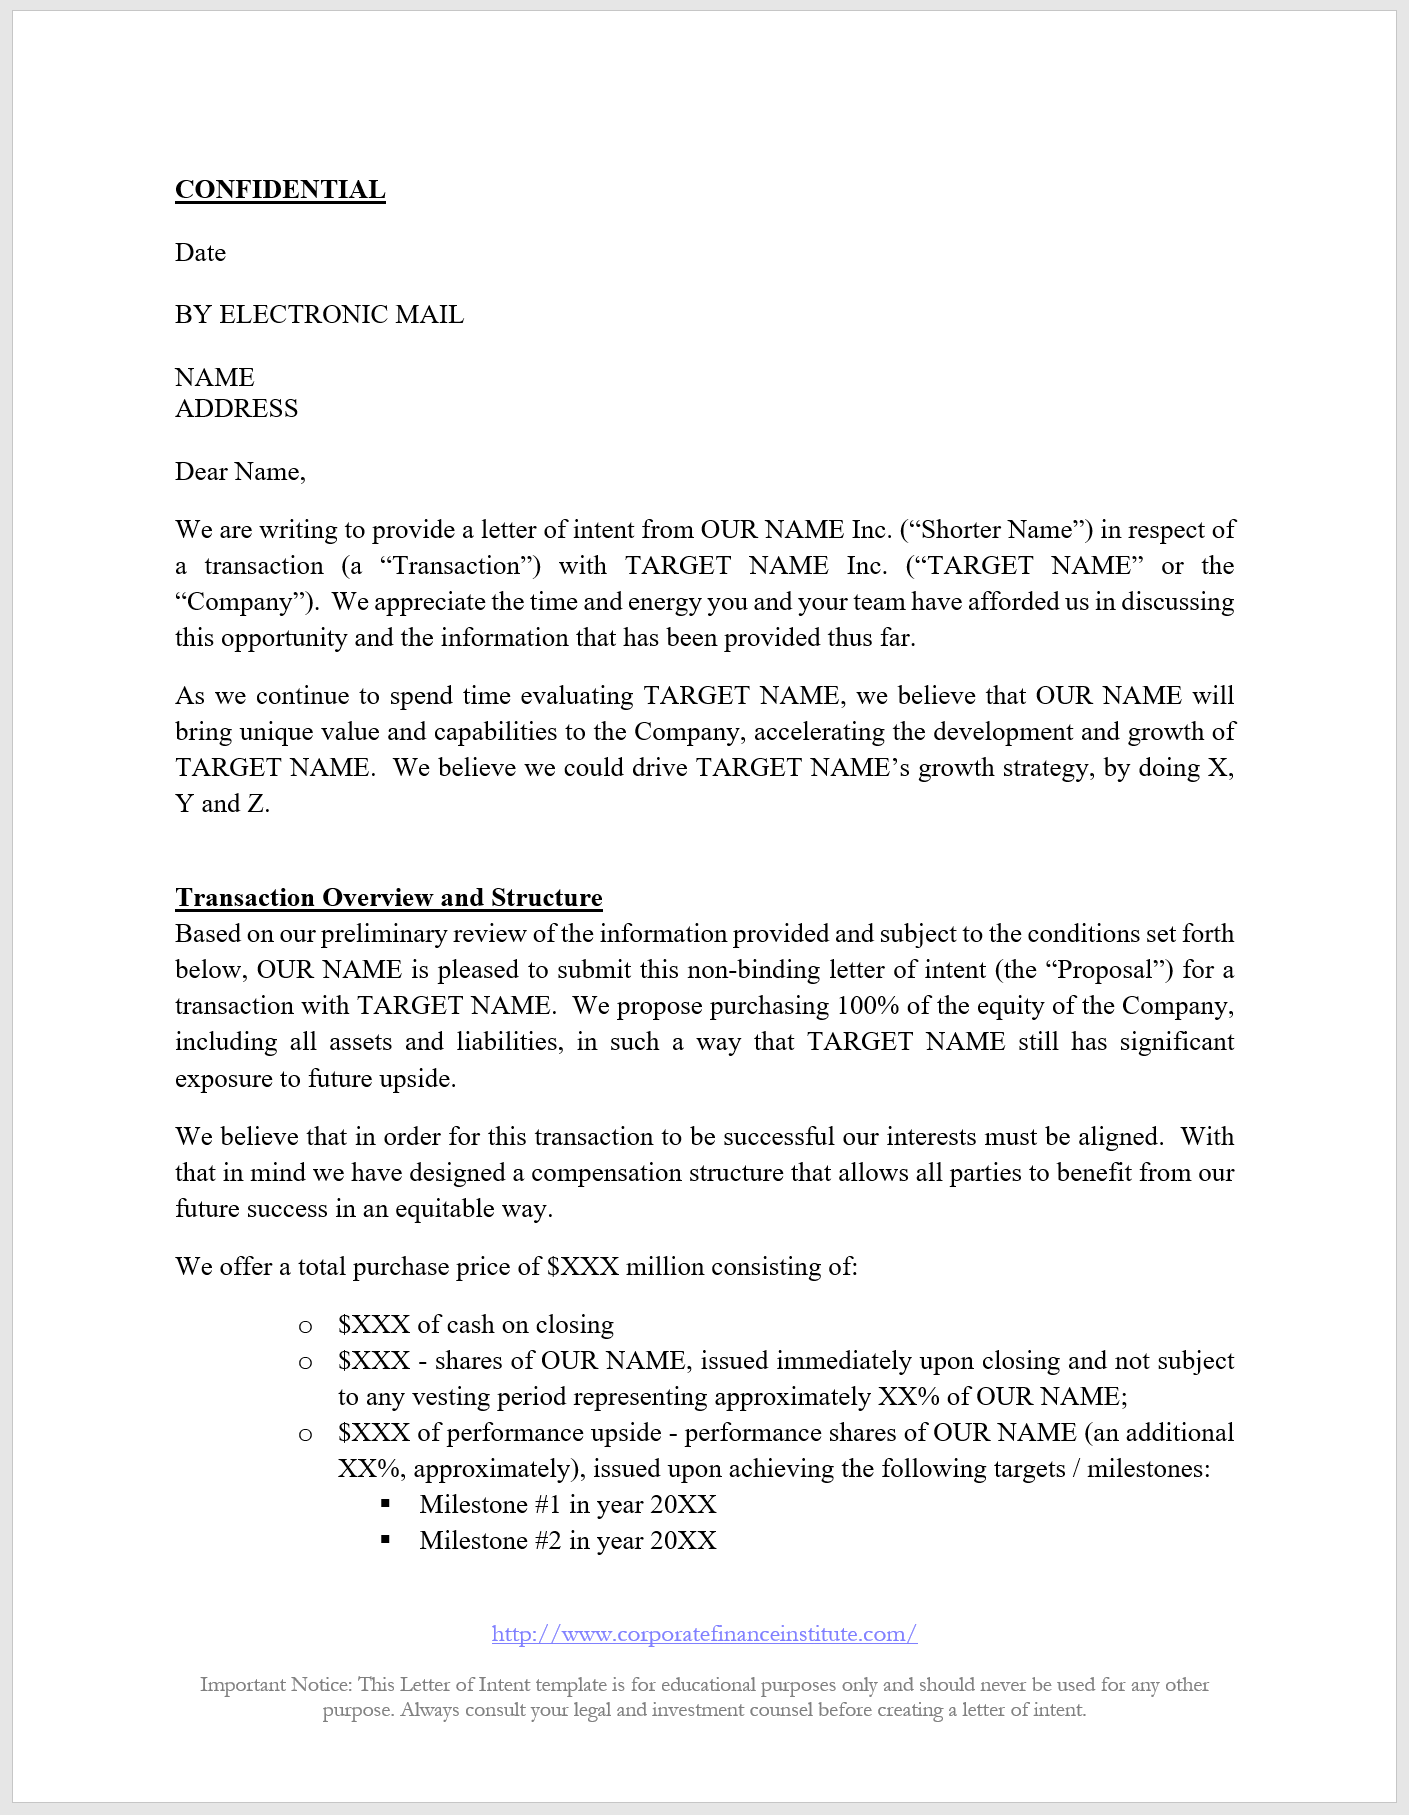 Letter Of Interest Outline from corporatefinanceinstitute.com